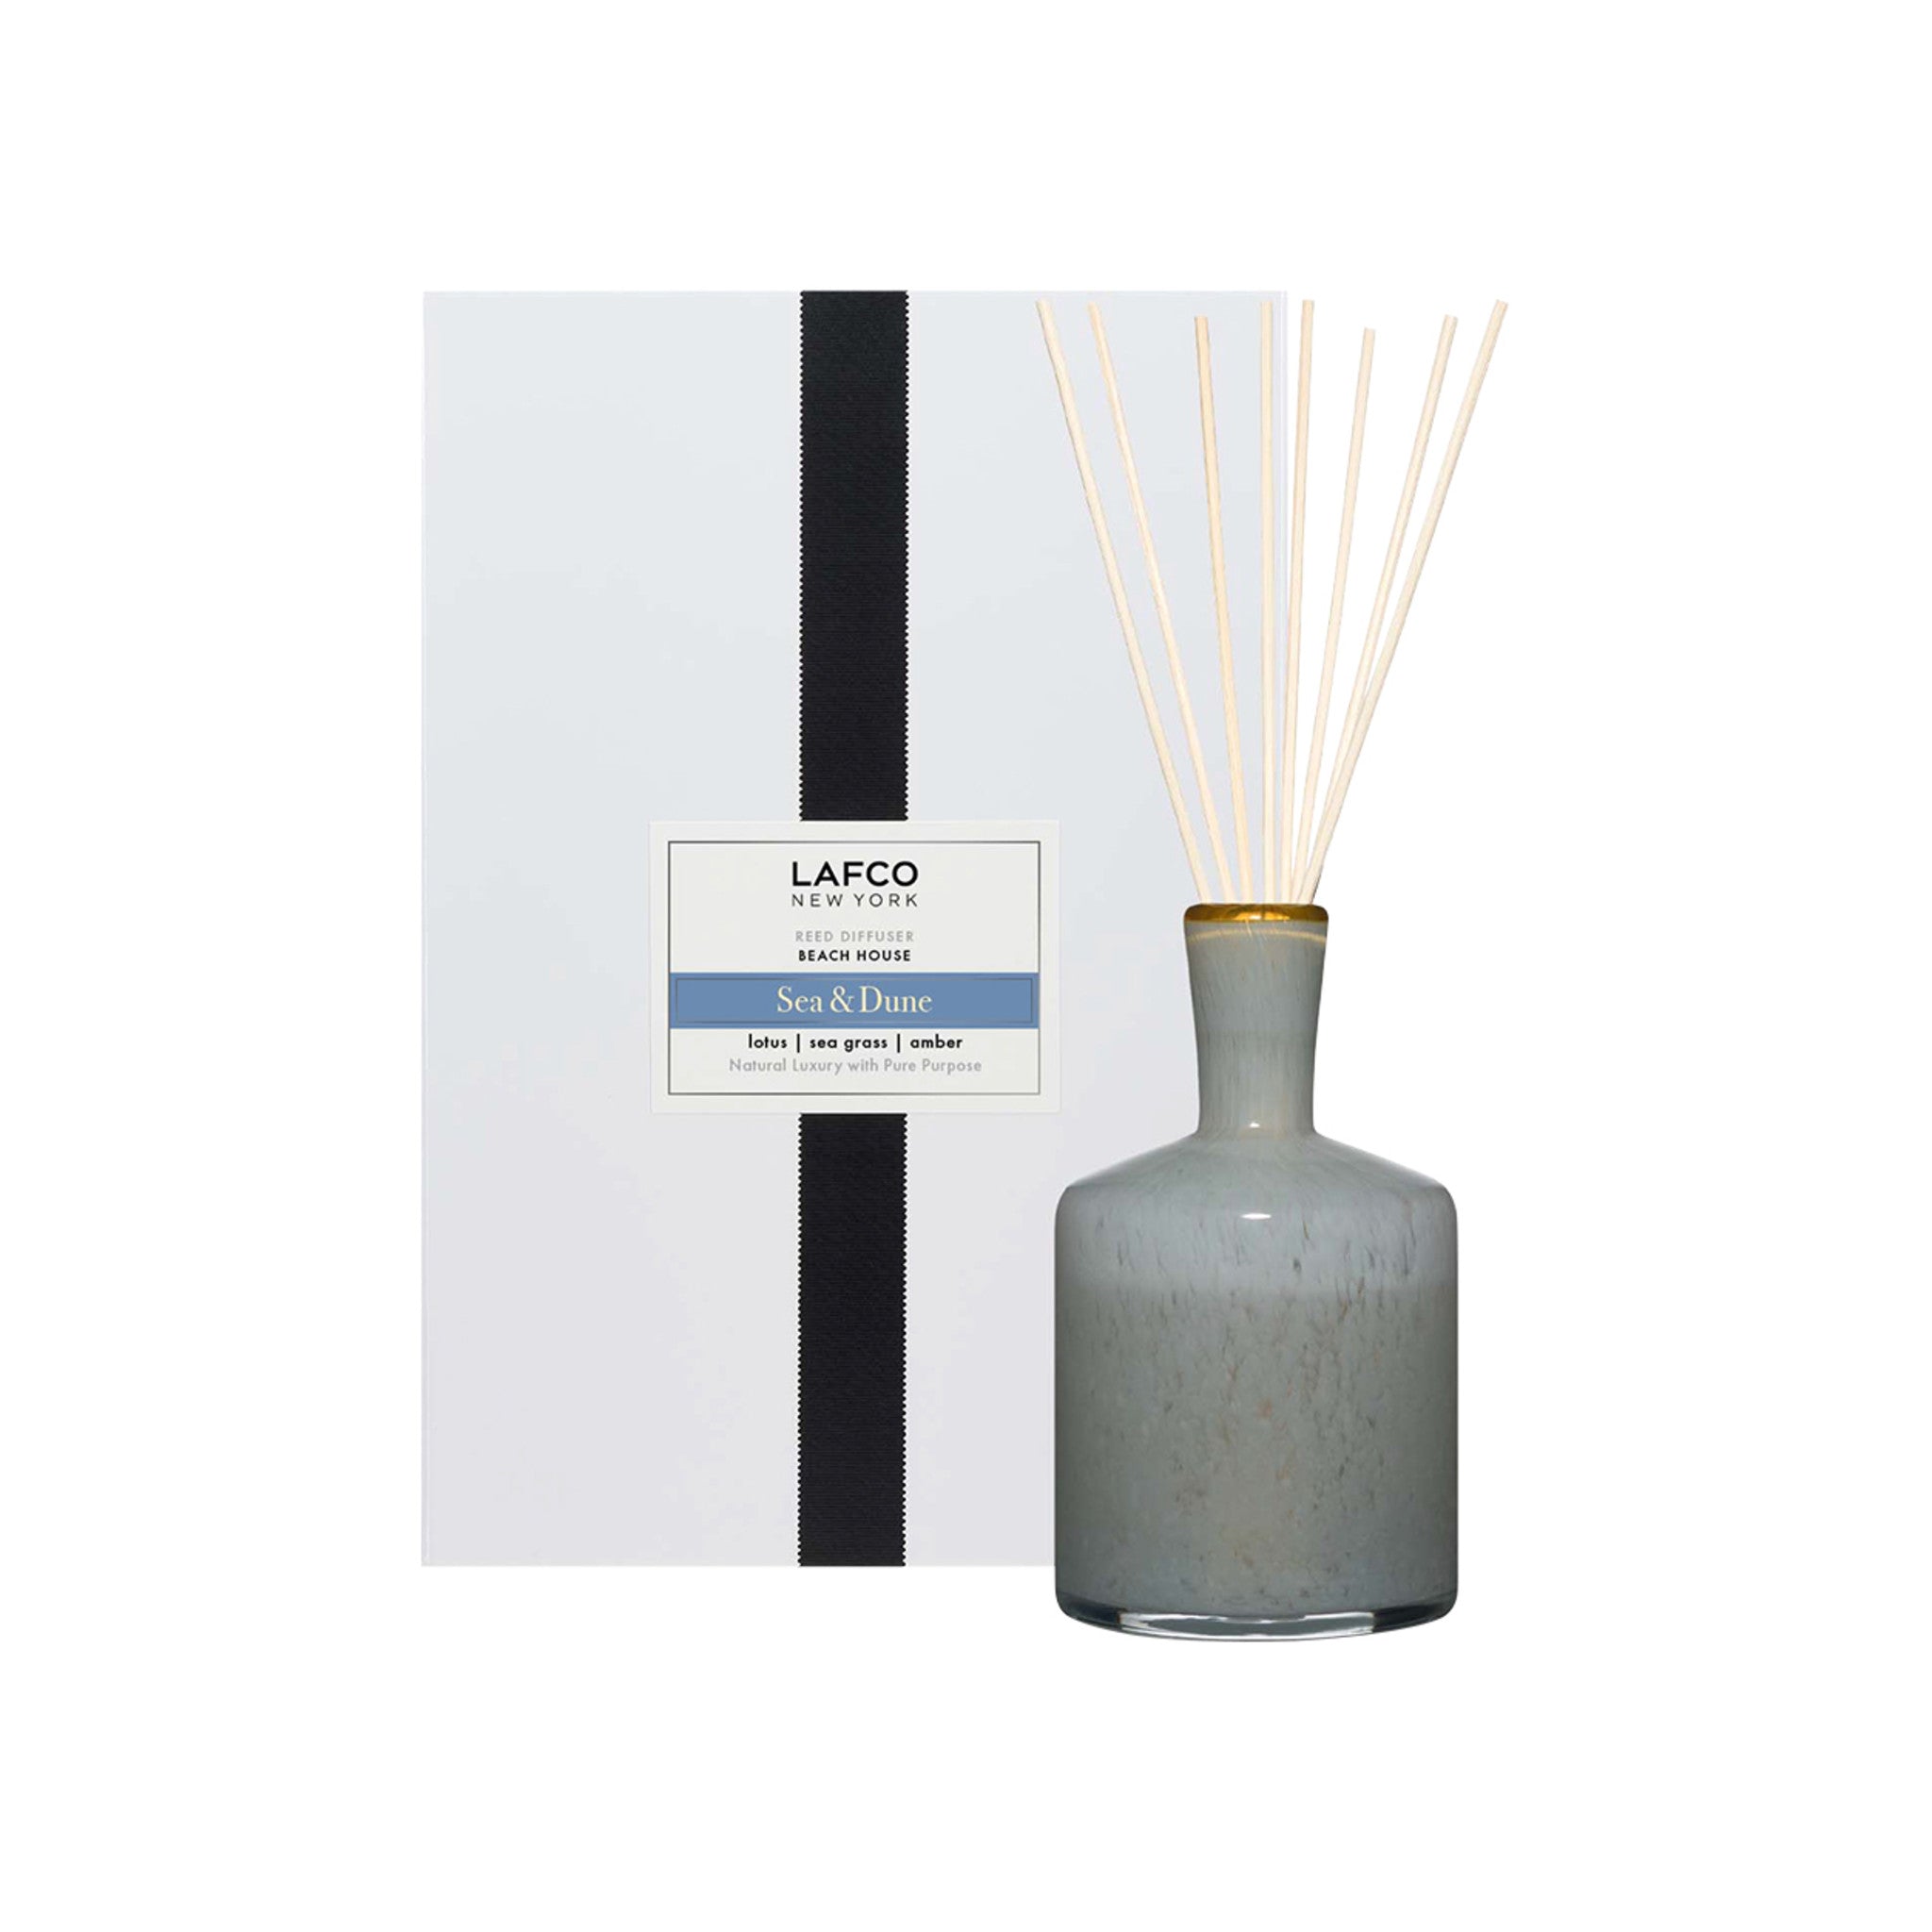 Lafco Sea and Dune Reed Diffuser main image.